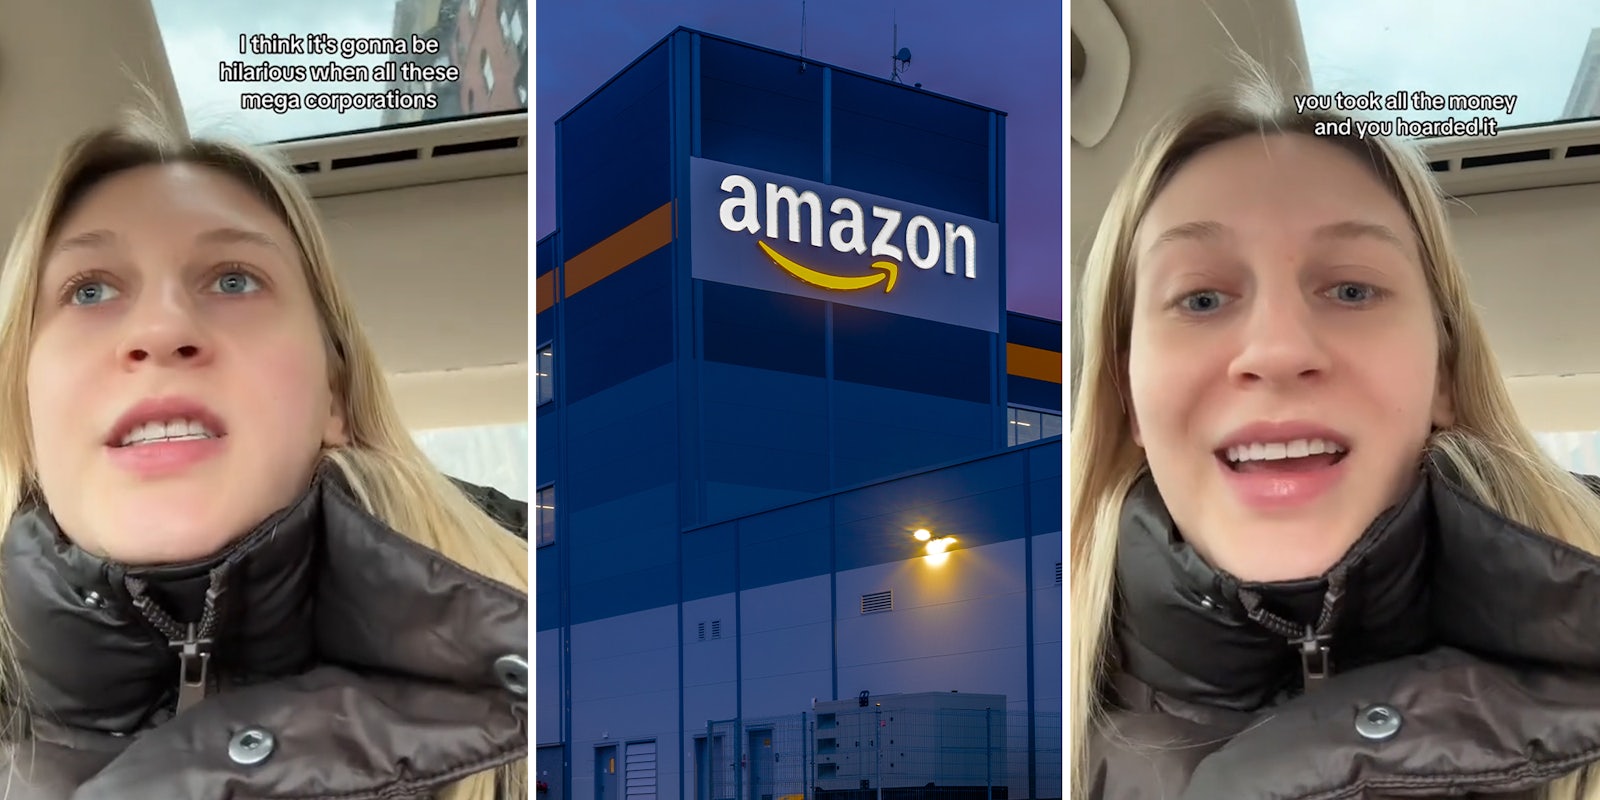 Woman blasts Amazon for getting corporate welfare in nation’s poorest state